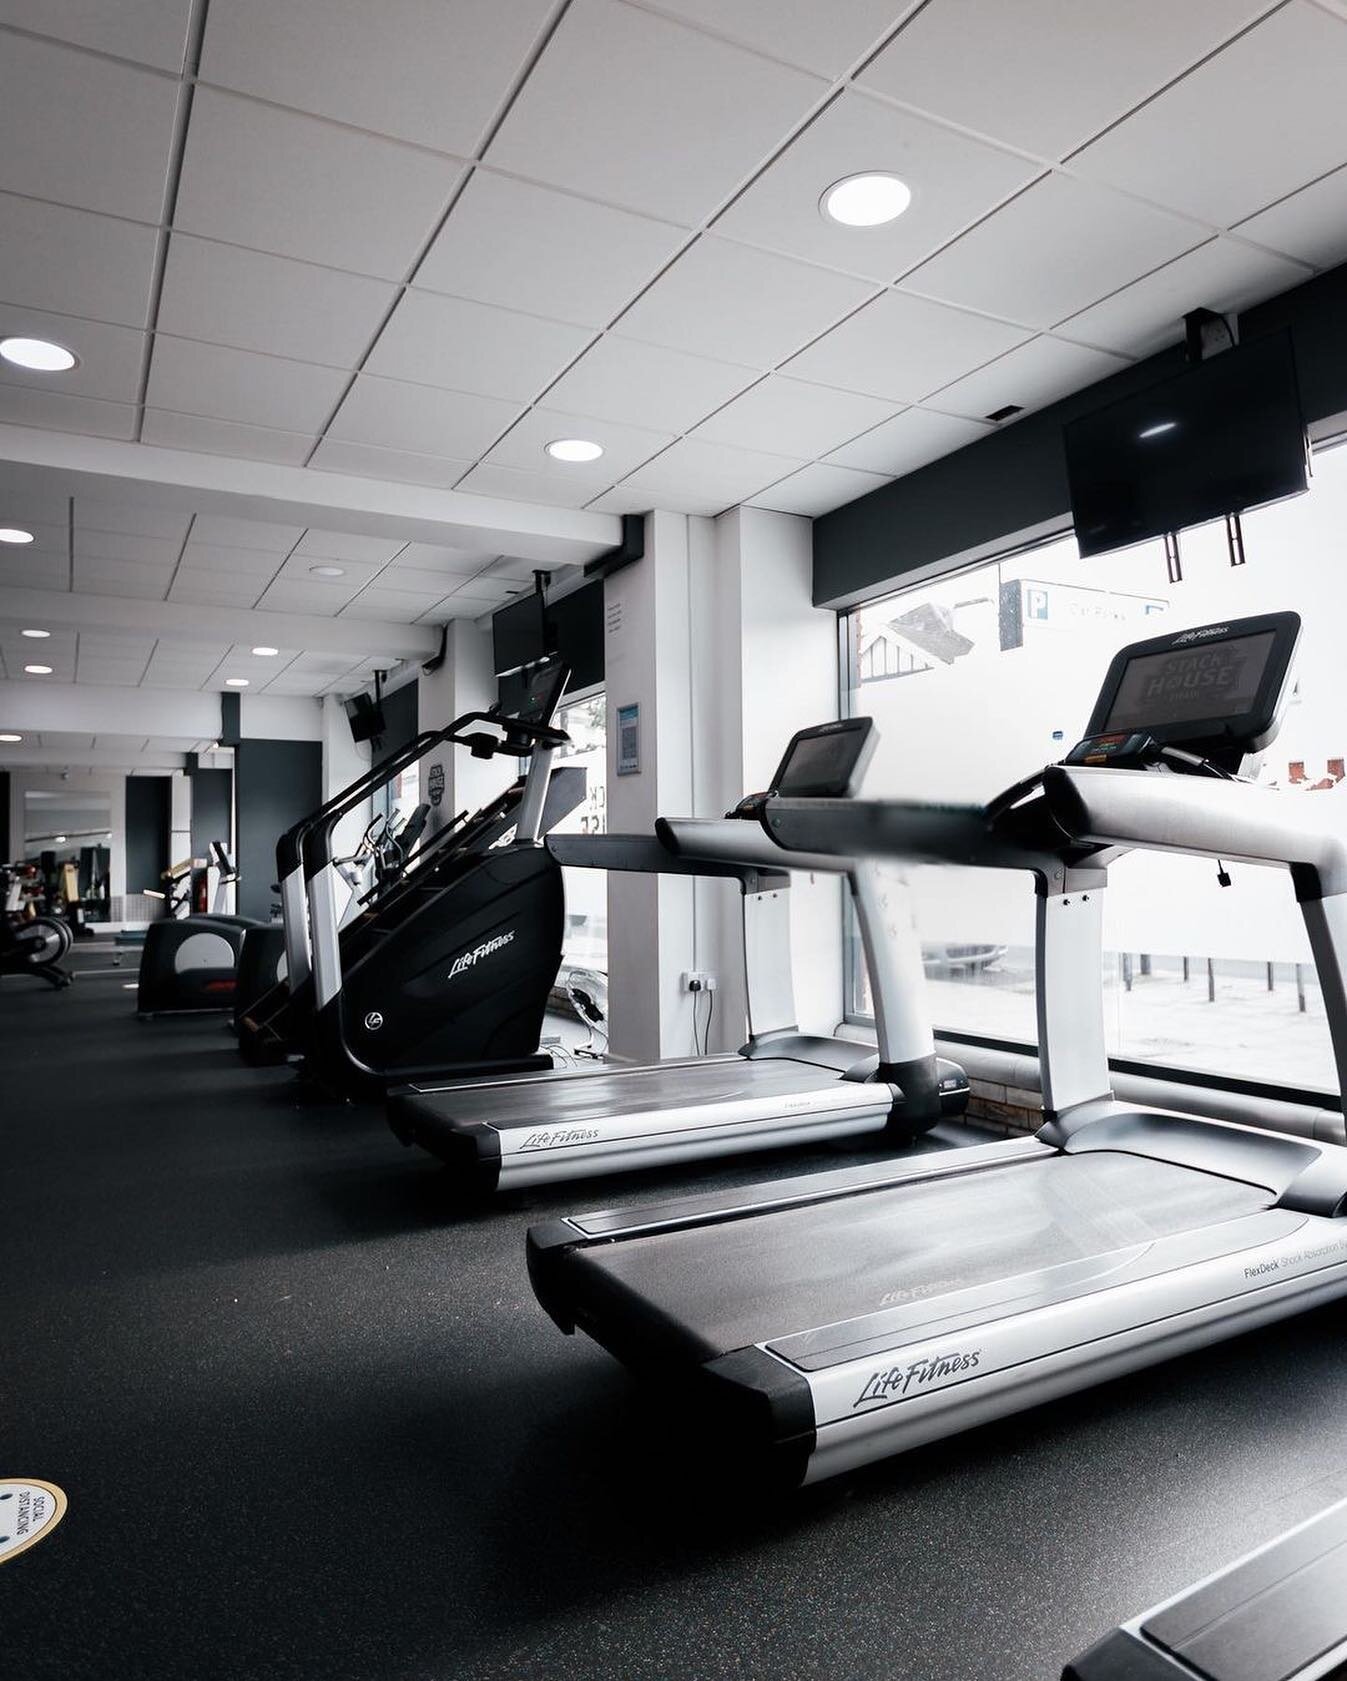 CARDIO EQUIPMENT AT STACK HOUSE GYM 

We have everything you need for a good cardio workout, whether it&rsquo;s low intensity steady state, high intensity interval training or short workouts, our selection includes:

TREADMILLS
ELLIPTICAL / CROSS TRA